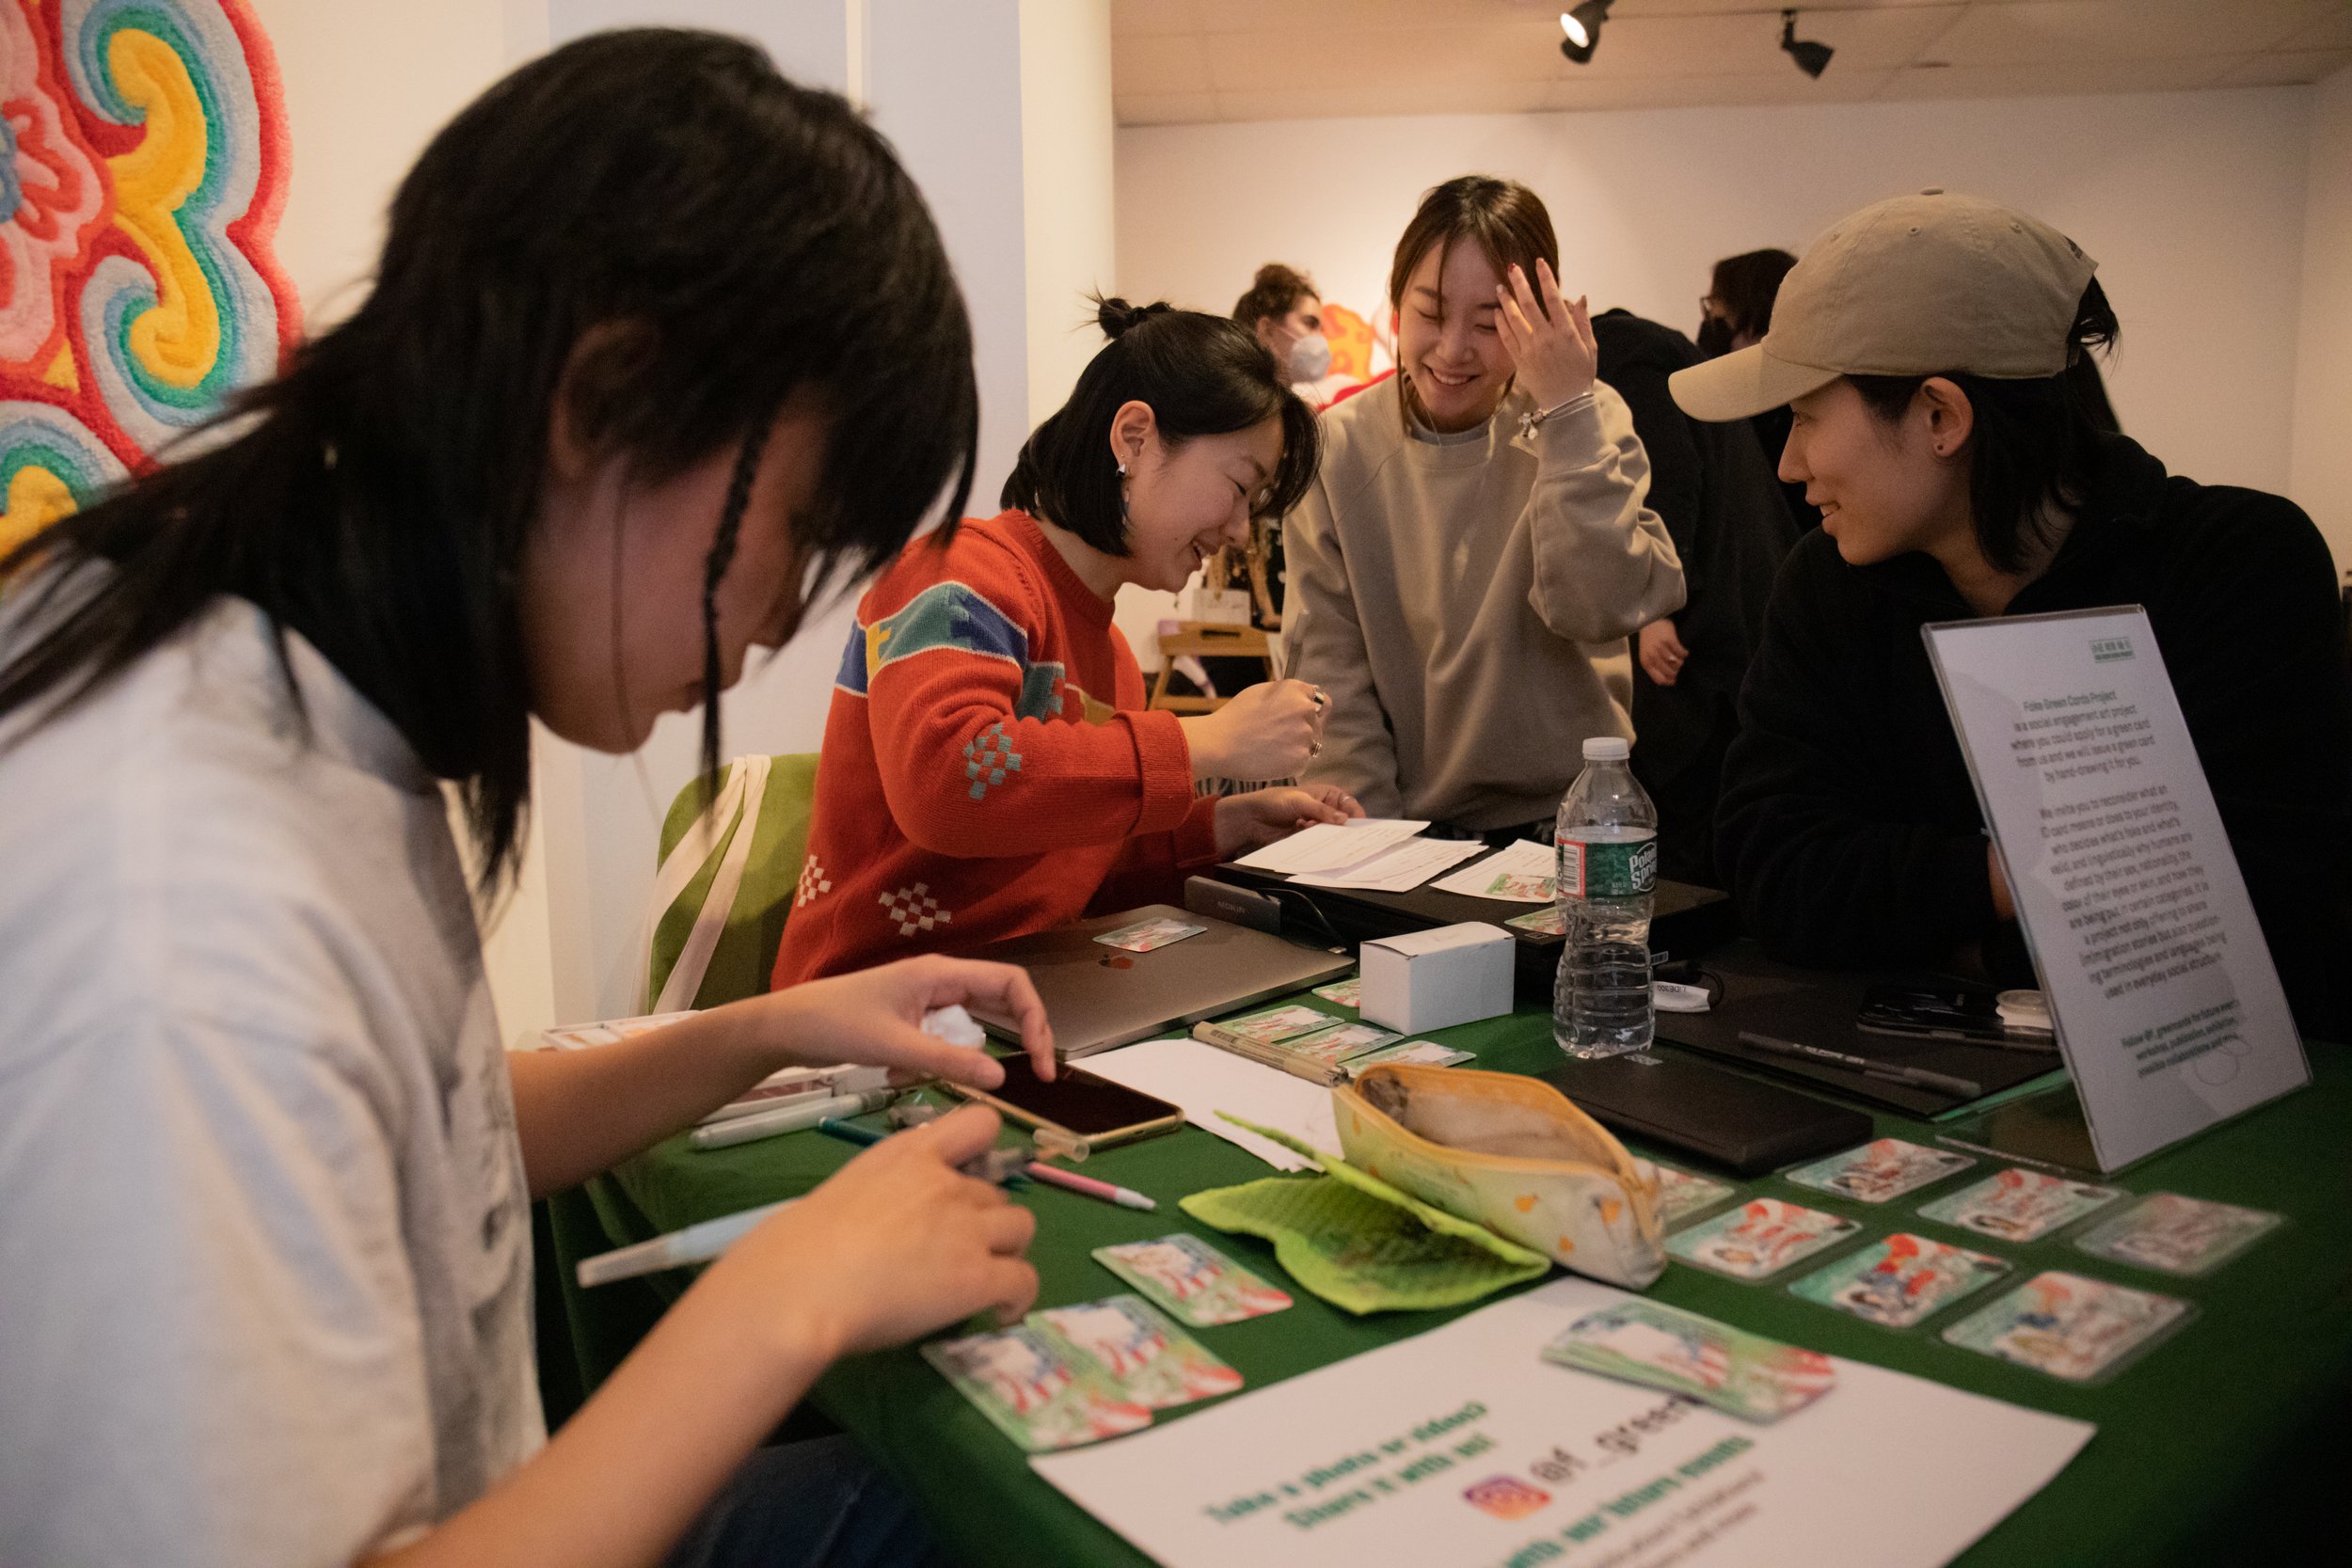  Xuan Liu left, draws participants while Youkun Zhou, middle, interacts, scans finished green cards and talks with participants Manman Li, middle right, and Ziyan Xin.  